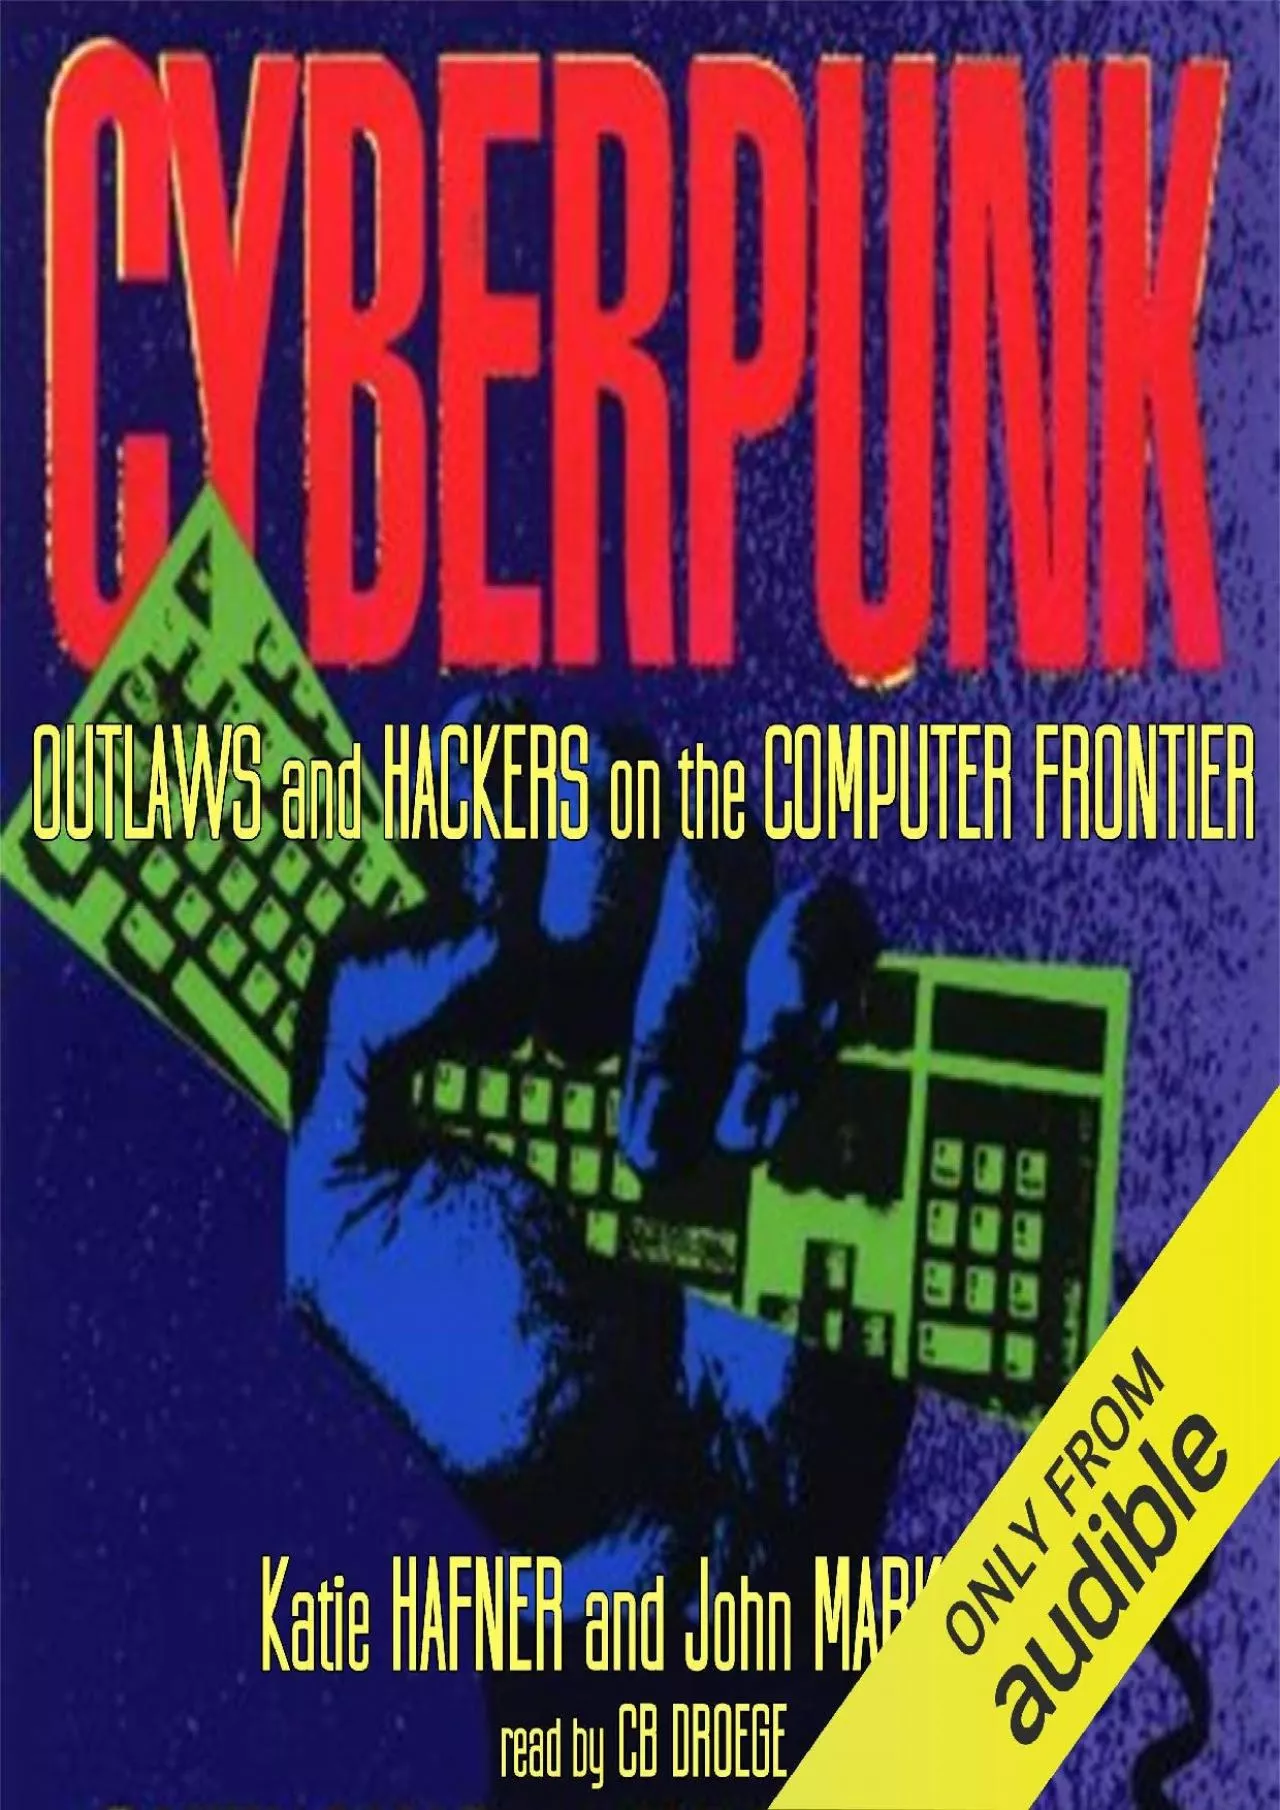 (BOOS)-CYBERPUNK: Outlaws and Hackers on the Computer Frontier, Revised